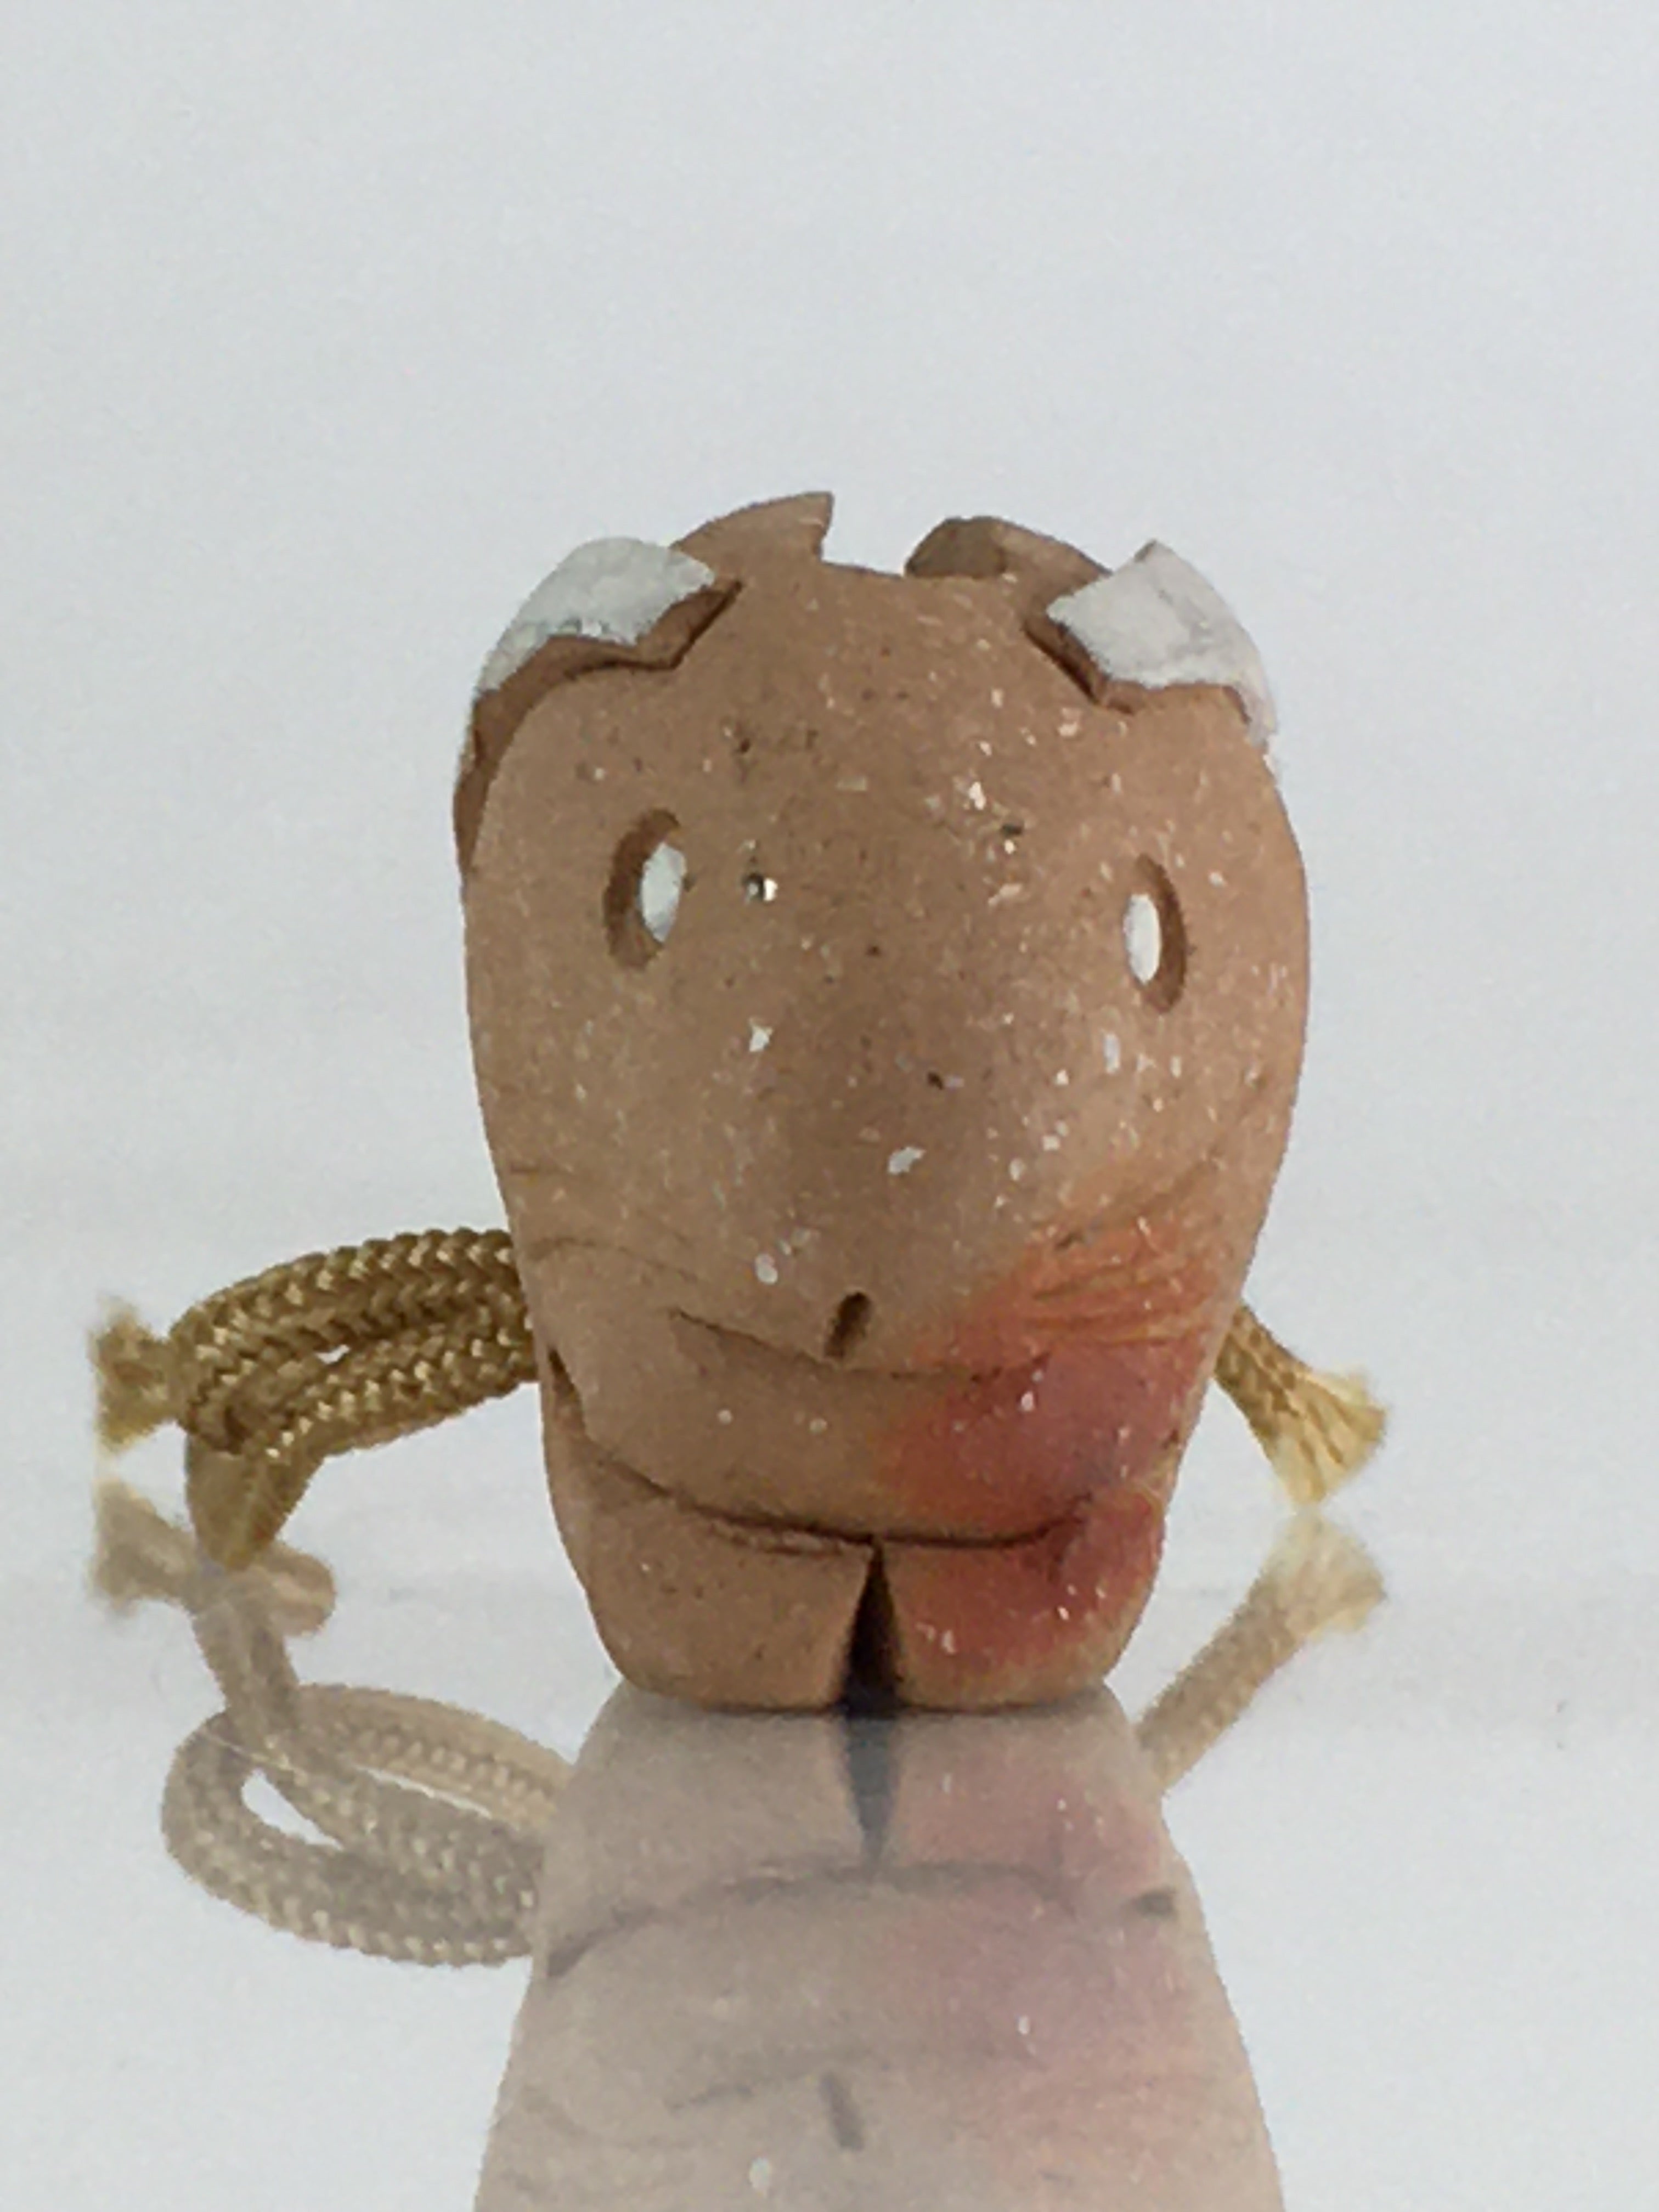 Japanese Clay Bell Dorei Vtg Ceramic Doll Amulet Brown Rabbit Local Toys DR416